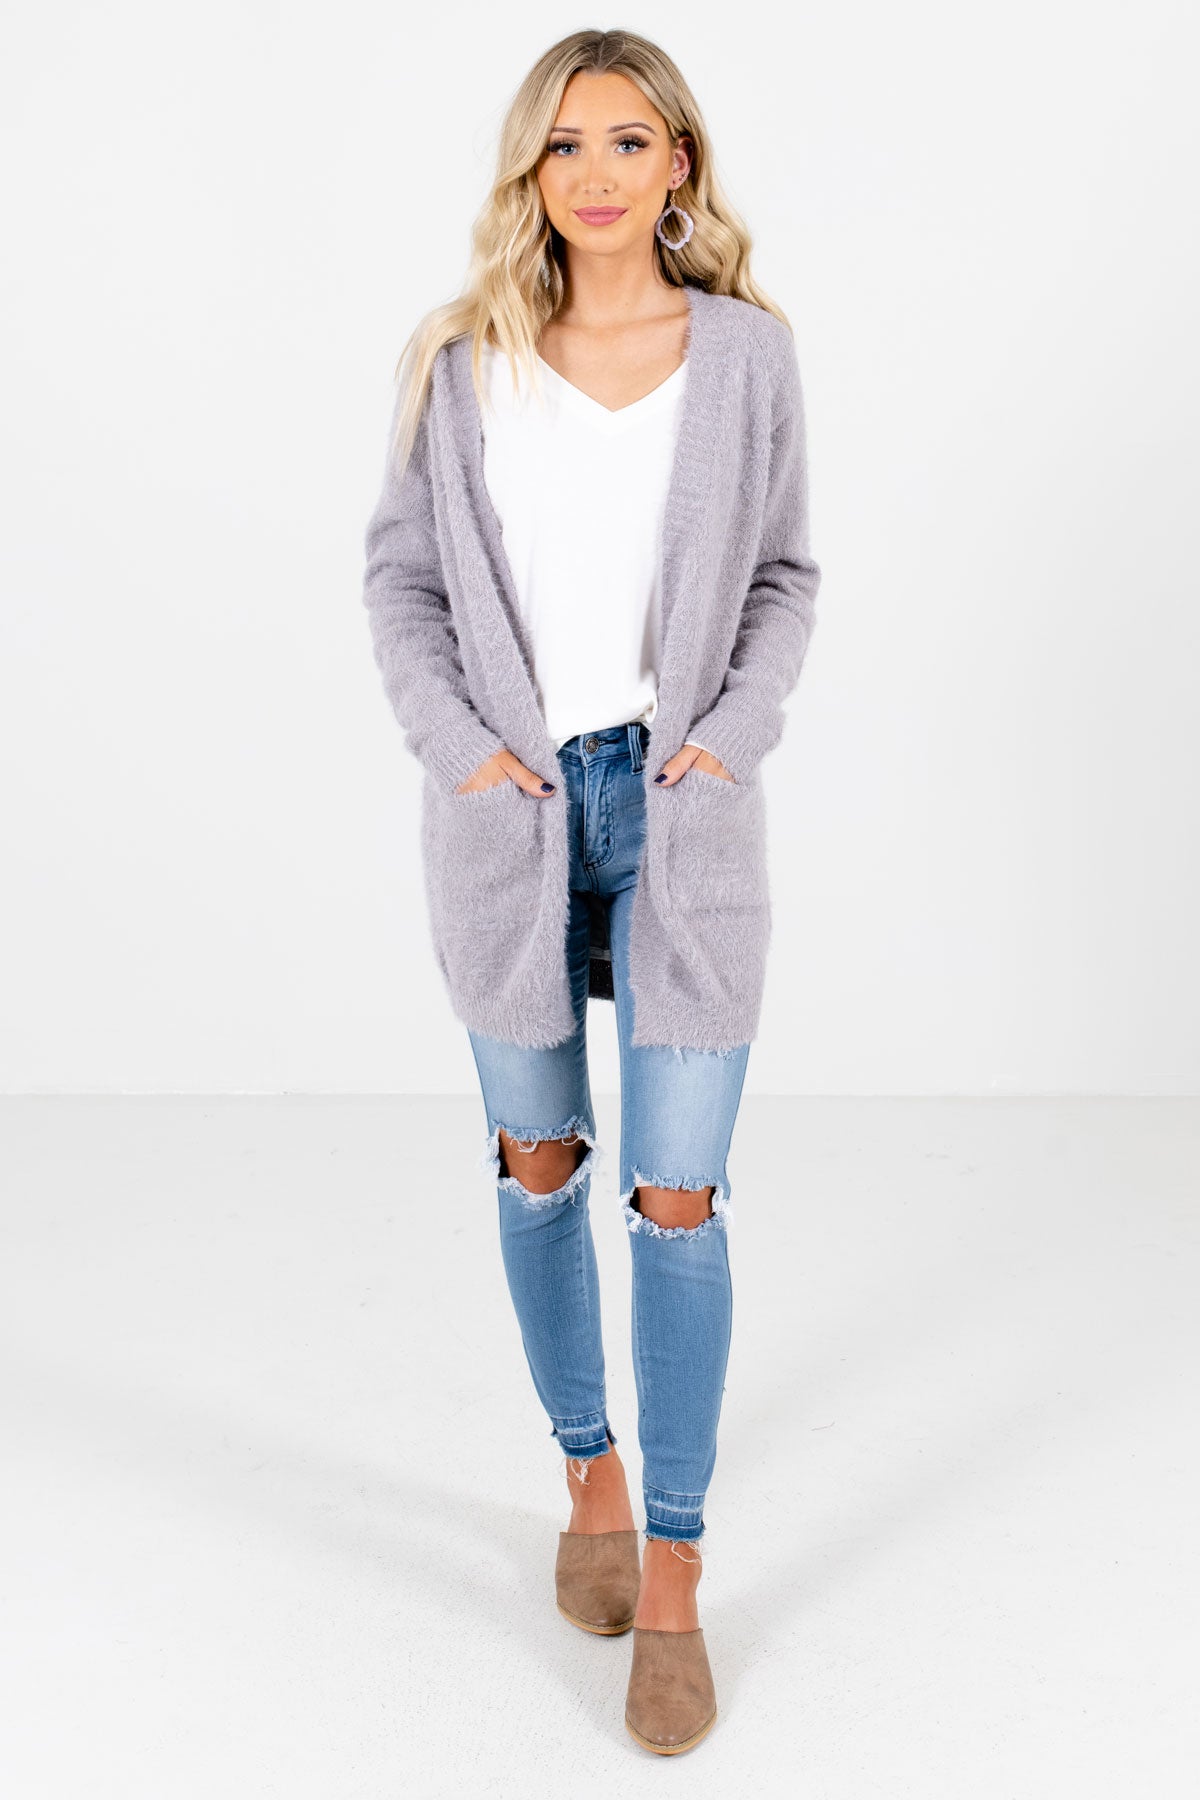 Women's Light Gray Fall and Winter Boutique Clothing